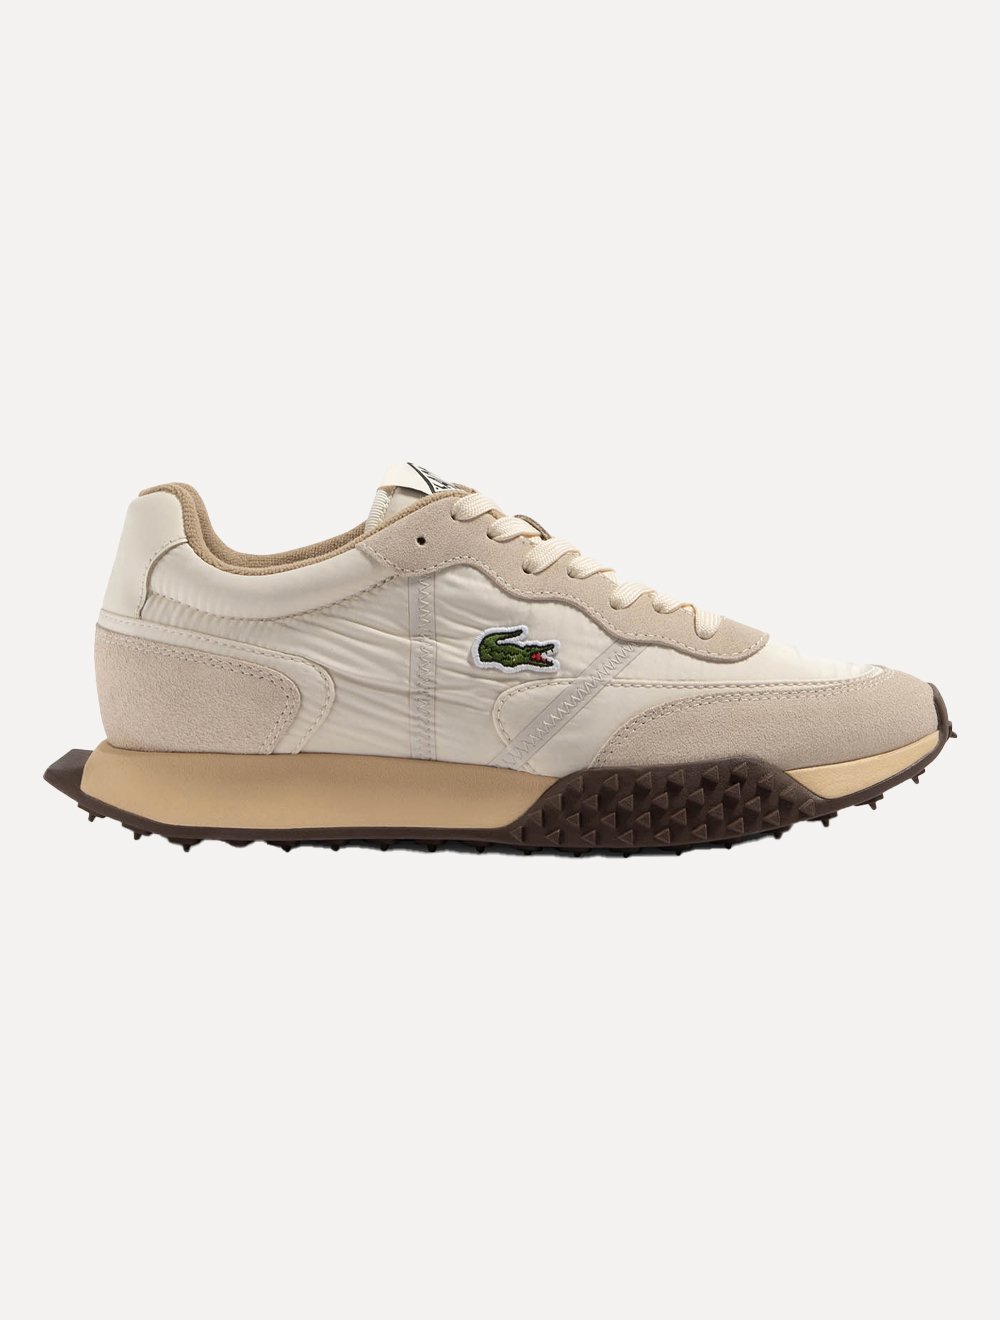 Tênis Lacoste Masculino Vintage L-Spin Deluxe 3.0 Off Wht/Dk Gum Off-White